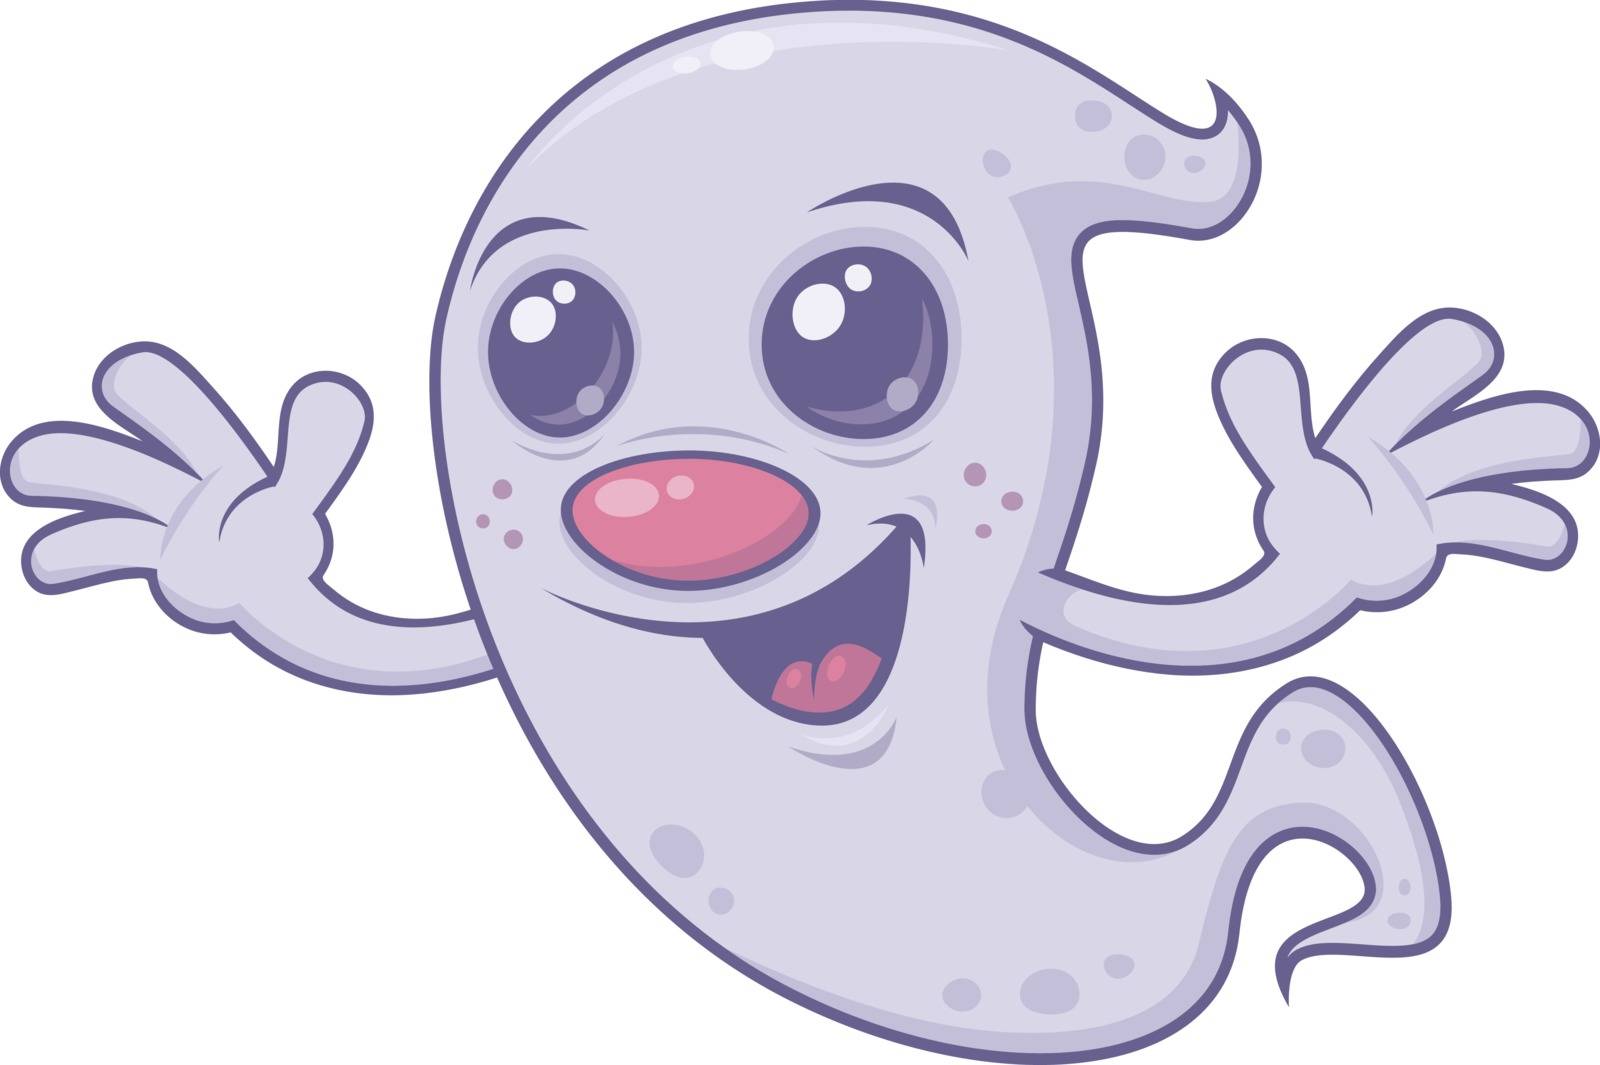 Vector cartoon illustration of a cute, retro-style grinning ghost. Great for Halloween!